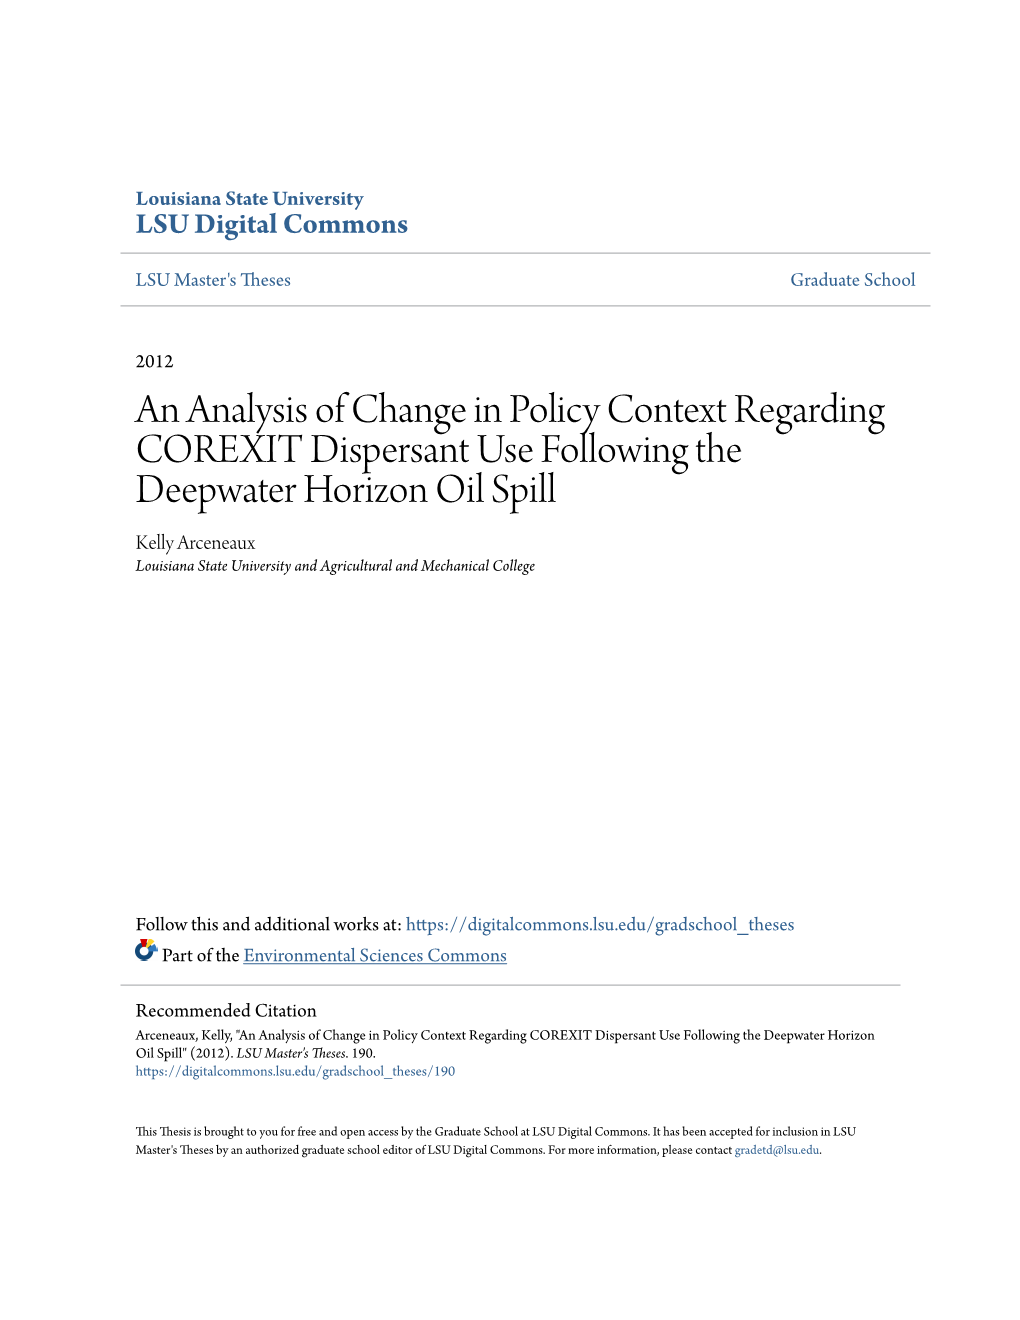 An Analysis of Change in Policy Context Regarding COREXIT